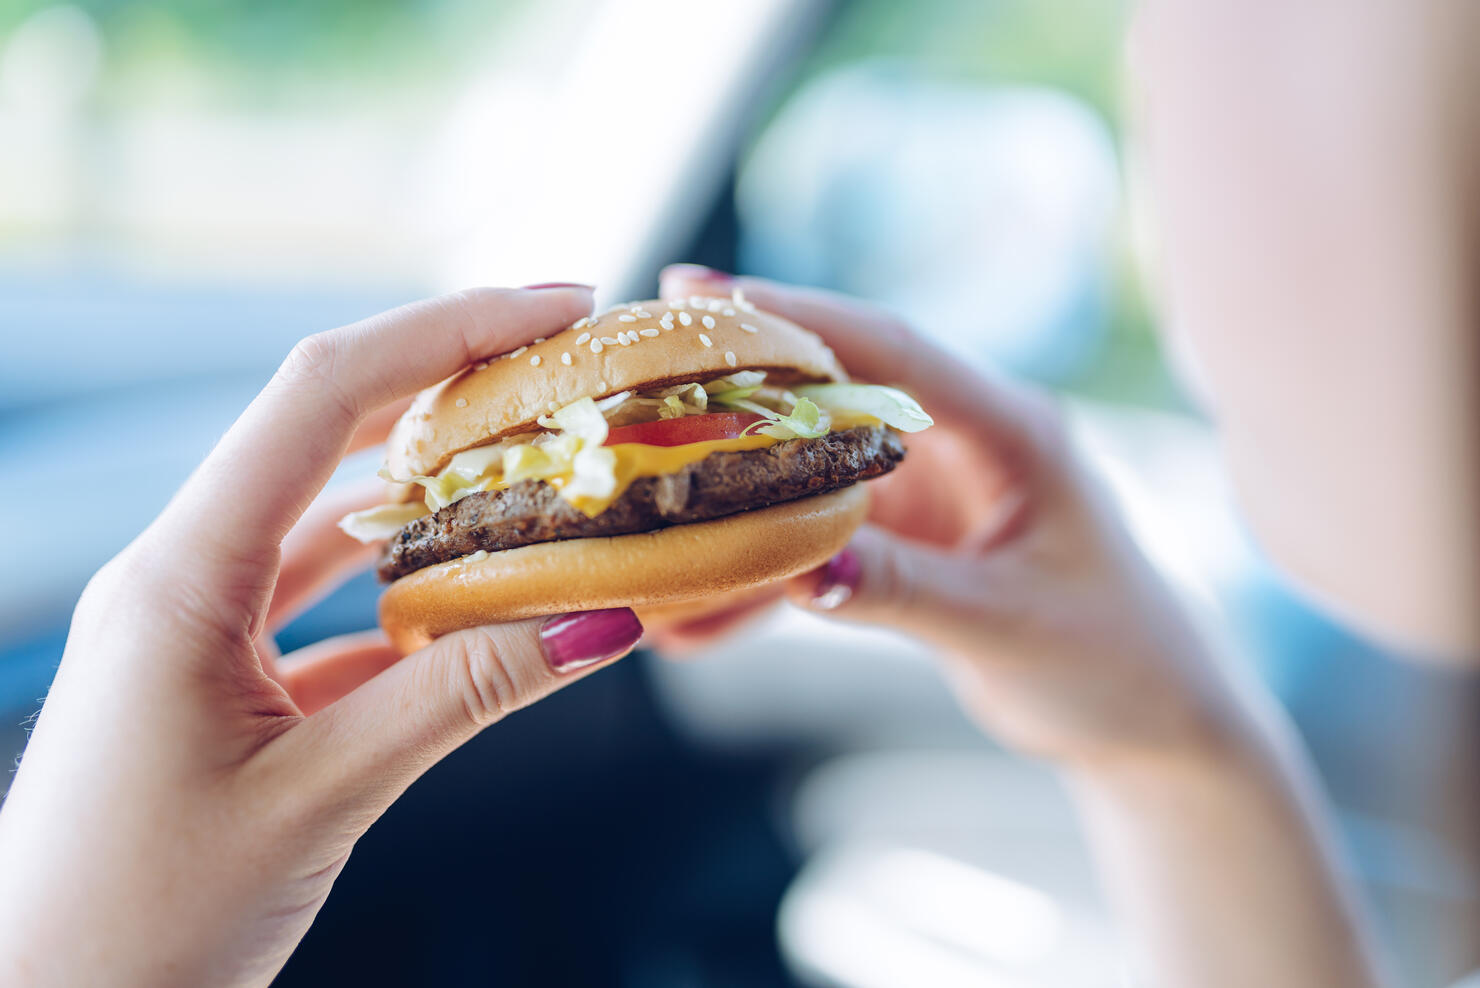 Girl holding a hamburger in  her hands sitting in a car. Unhealthy eating concept